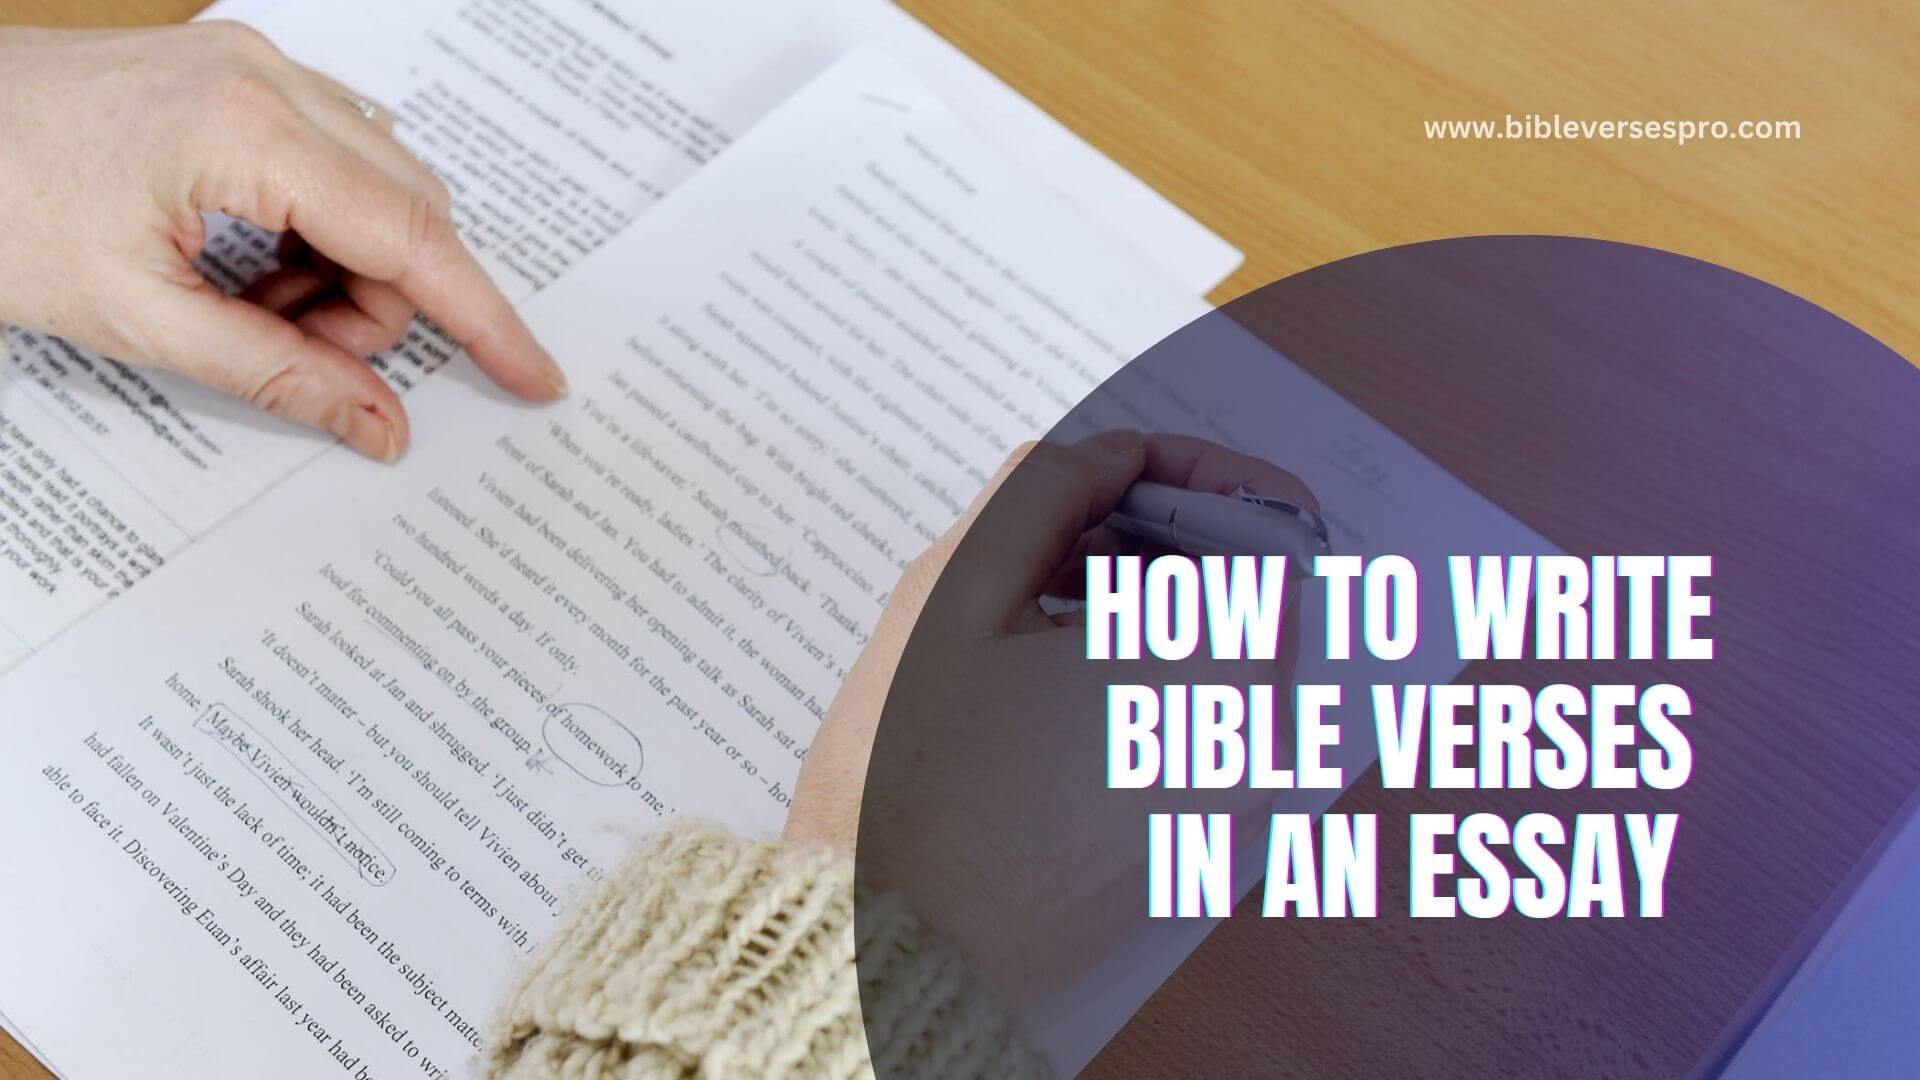 How To Write Bible Verses In An Essay (1)